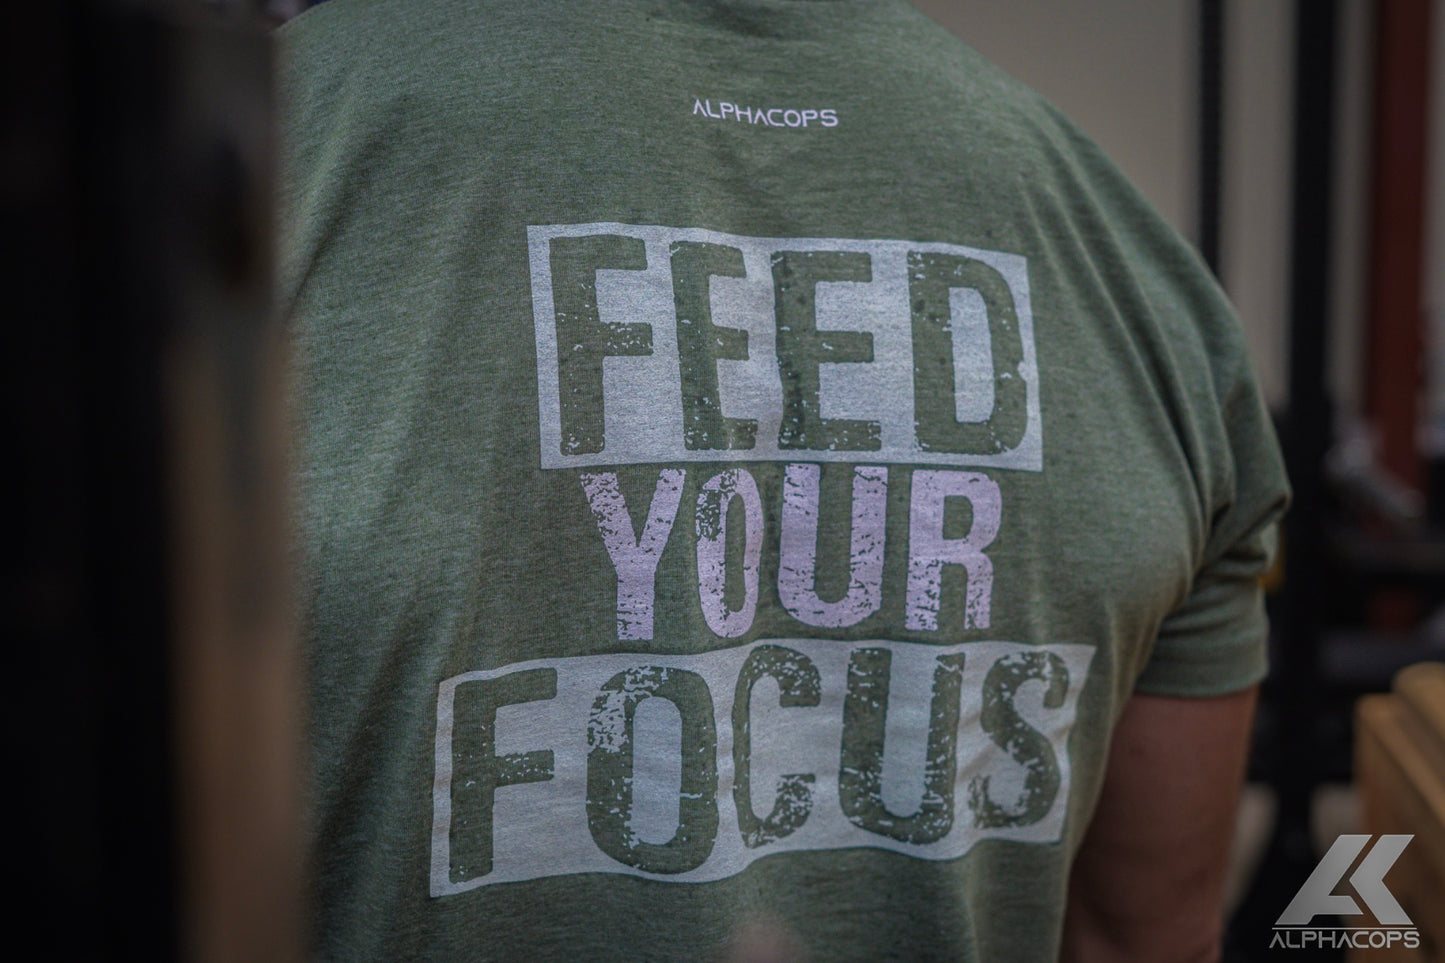 Alphacops - Feed your focus